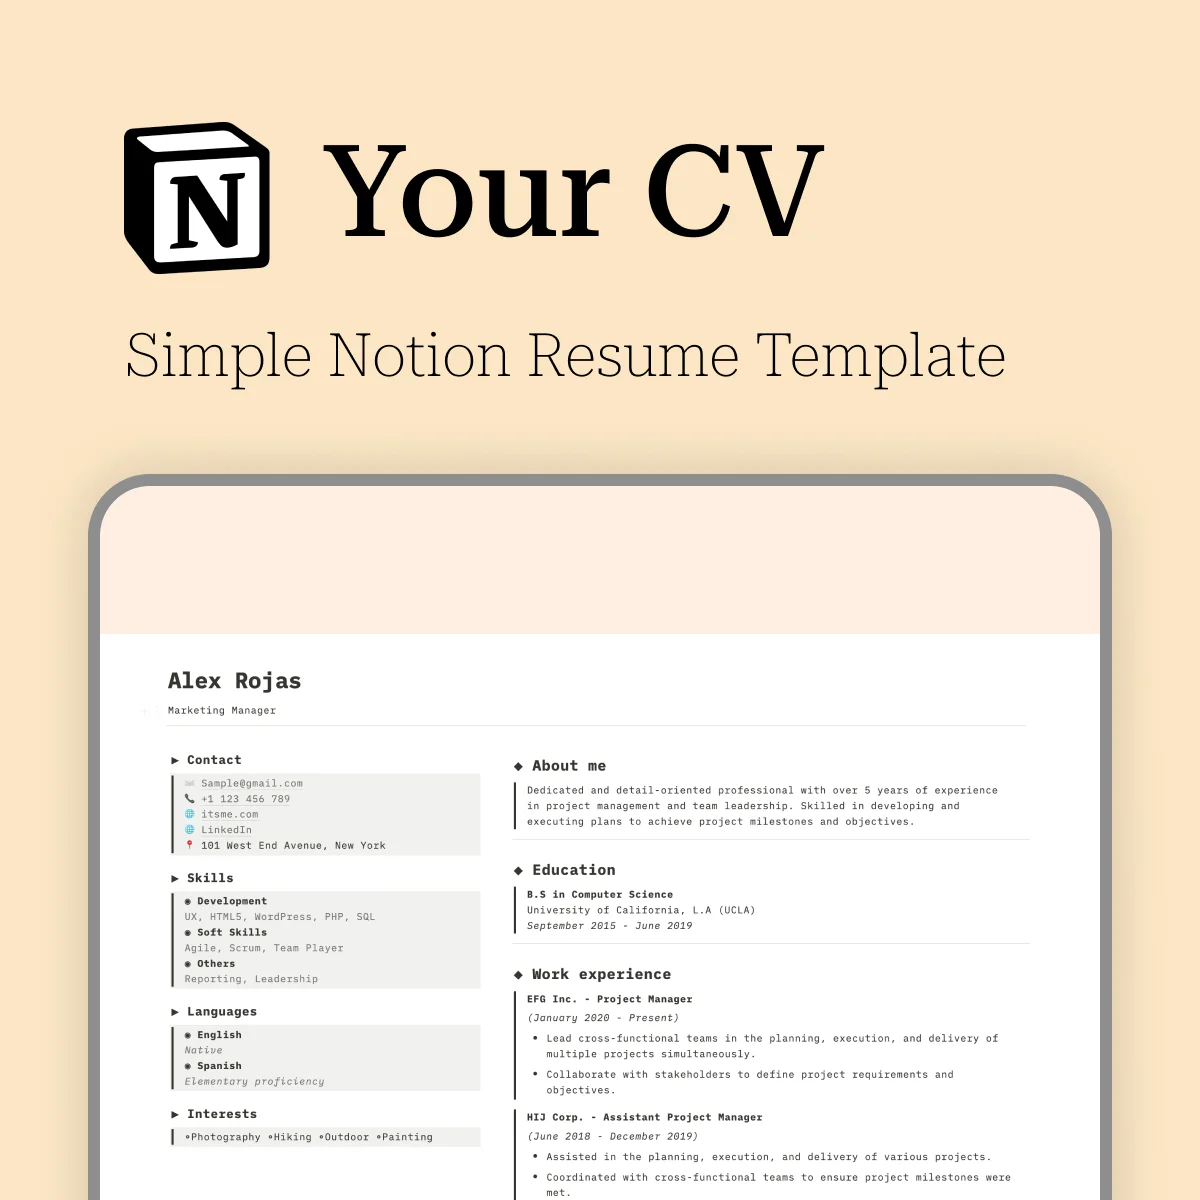 Your CV – the Simple Notion Resume Template